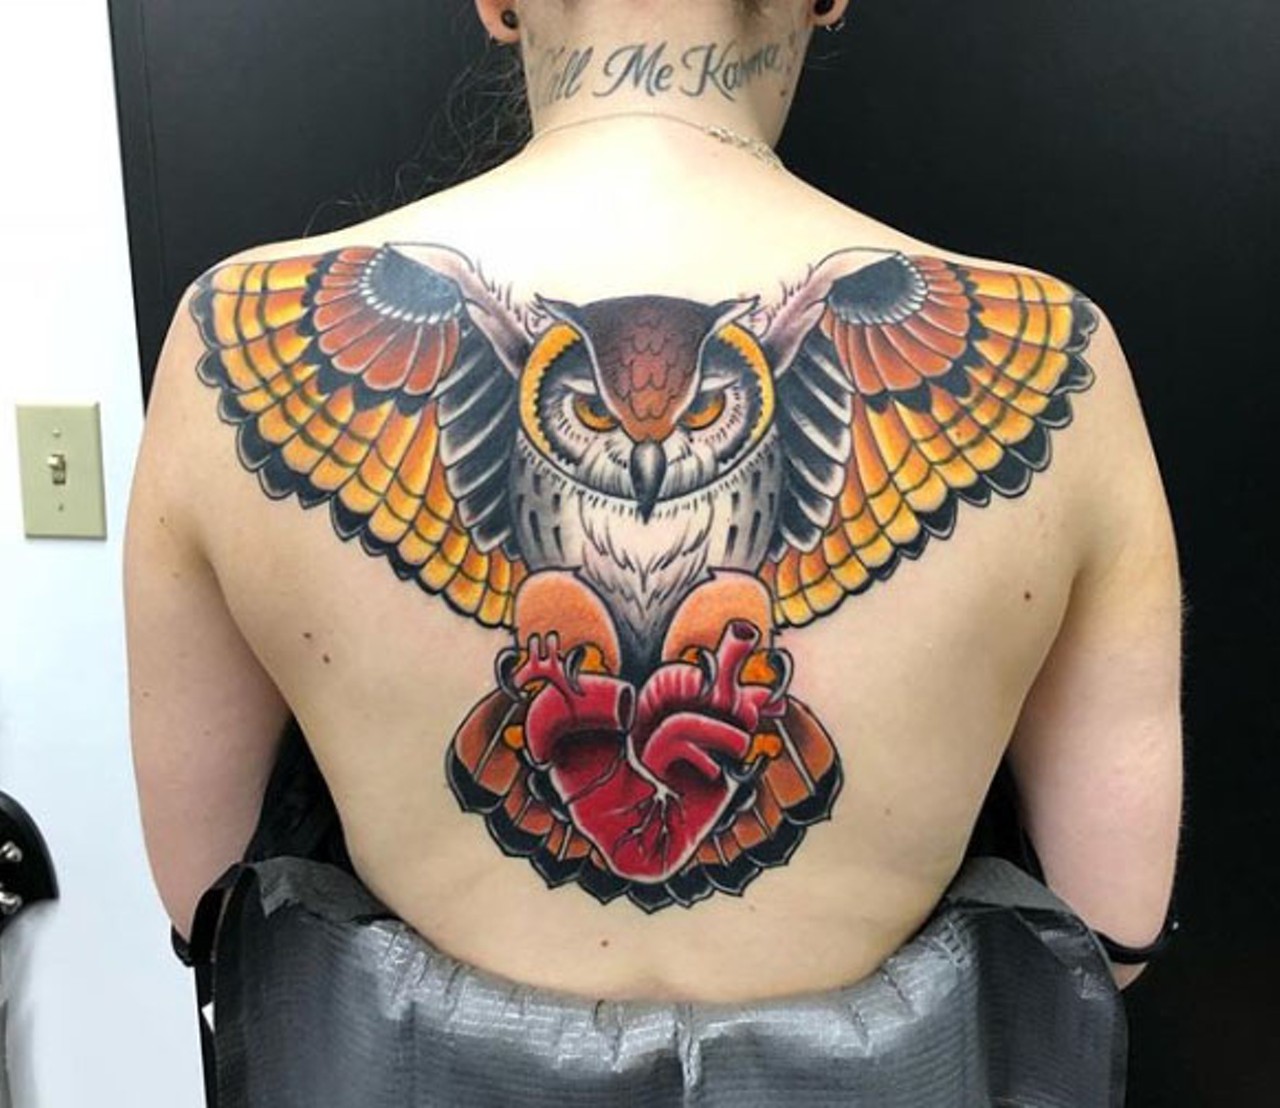 Tried and True Tattoo
1150 Abbe Rd., Elyria, 440-281-9996
Tried and True proves to be a truly great tattoo shop, offering clean and affordable tattoos. 
Photo via triedandtrueohio/Instagram